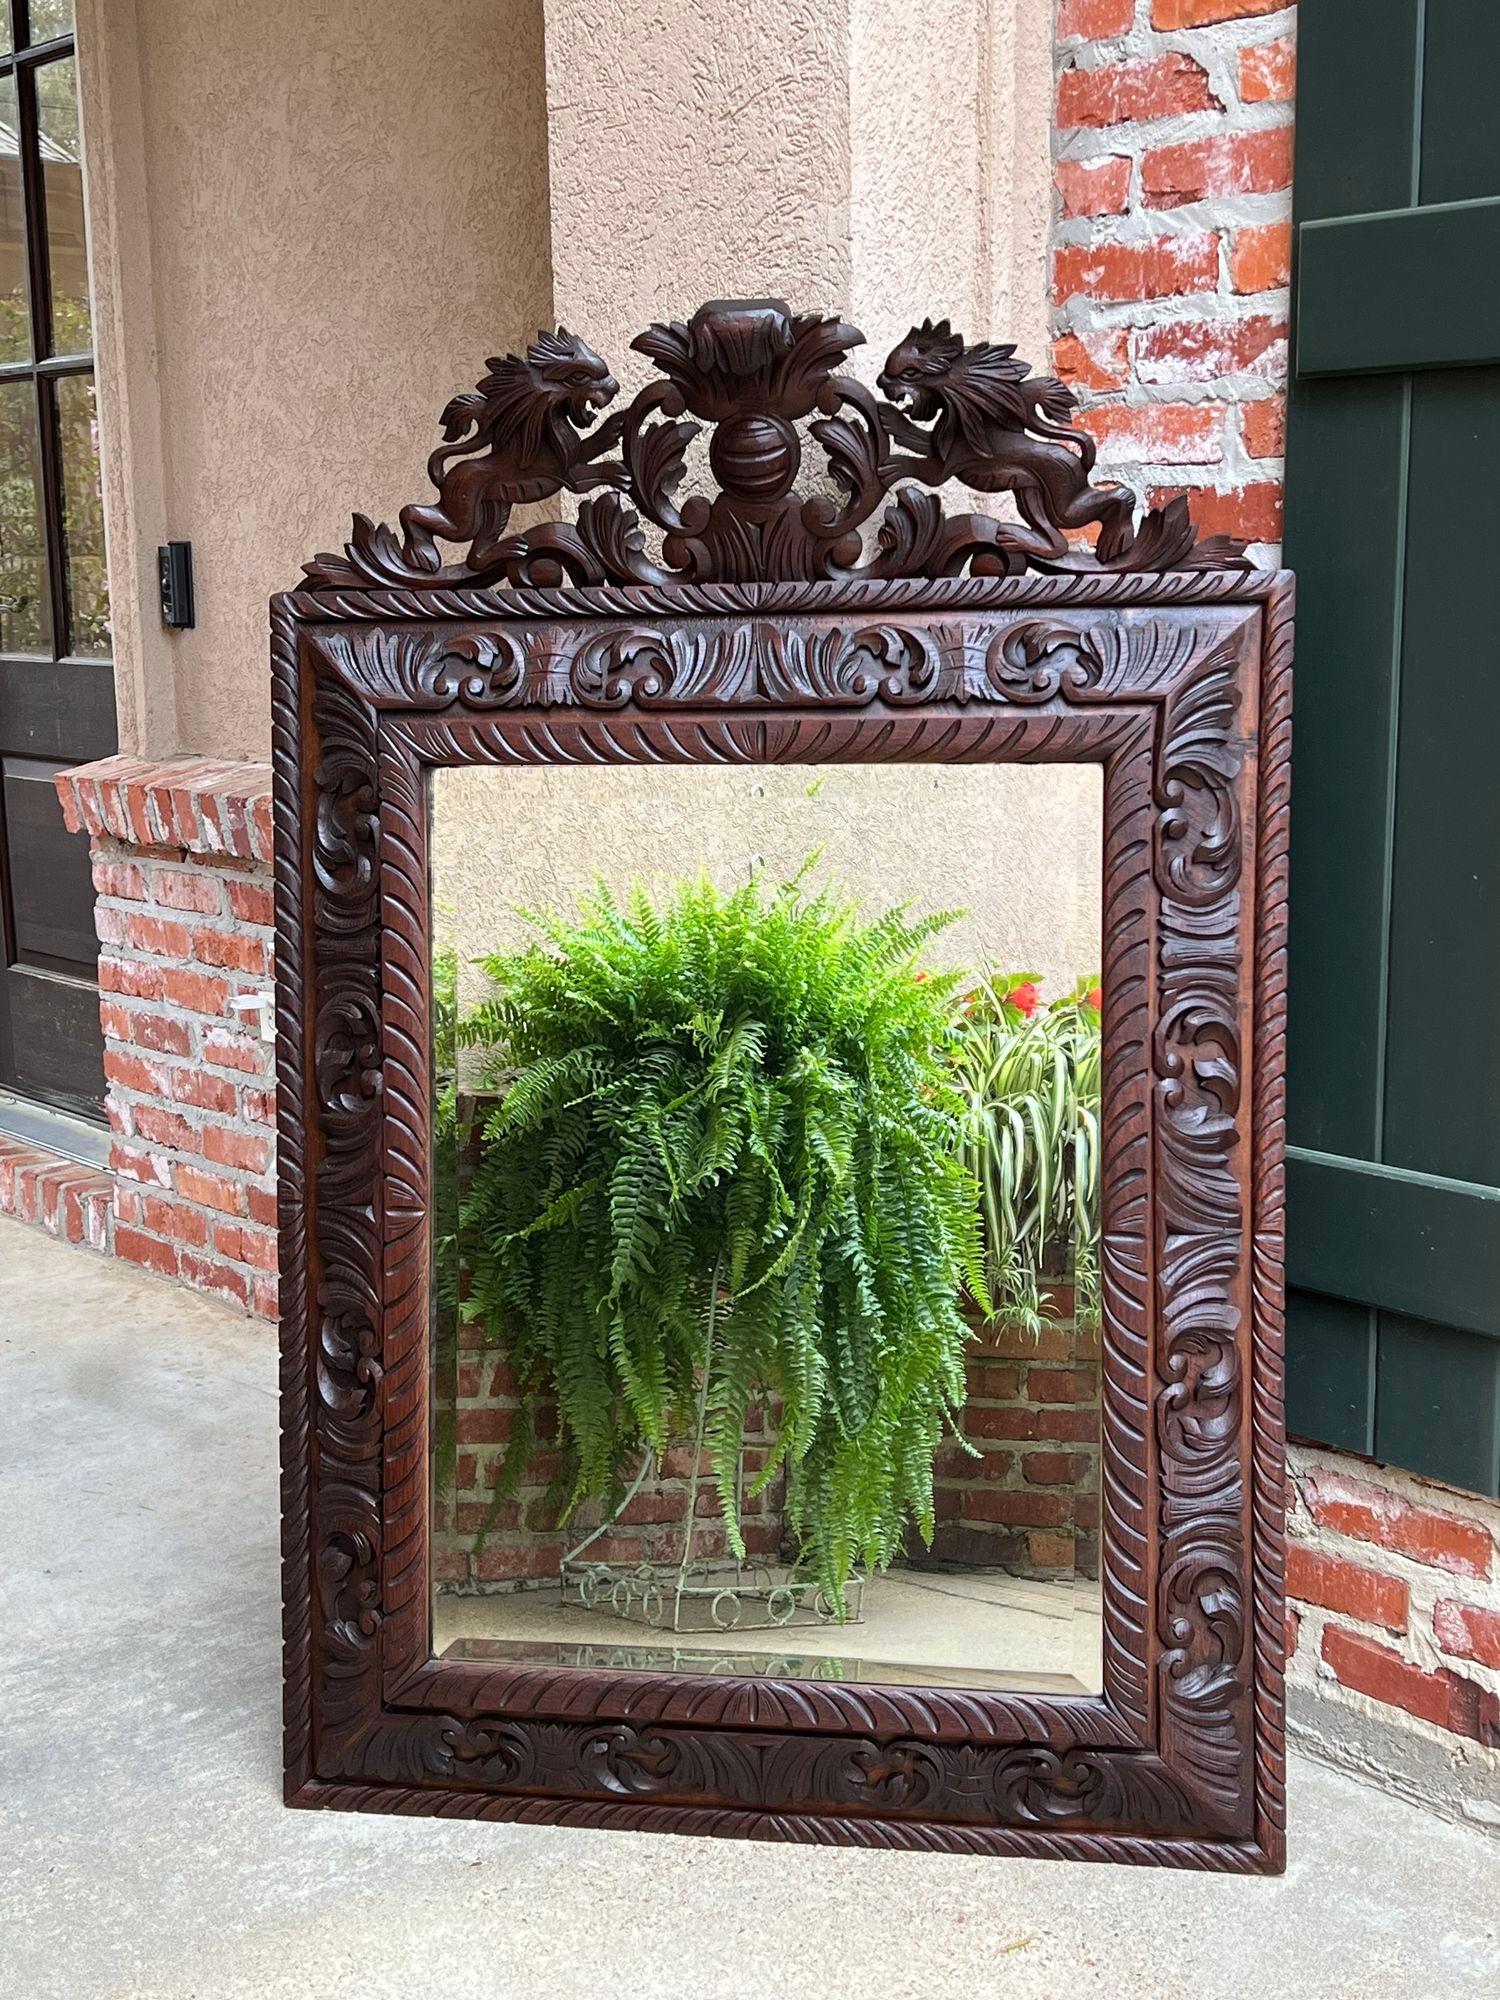 Antique French Pier wall mirror renaissance black forest lion crest carved oak.

Direct from France, another fabulous hand carved frame mirror, one of a large group in our most recent container The original large crown sets the tone and features